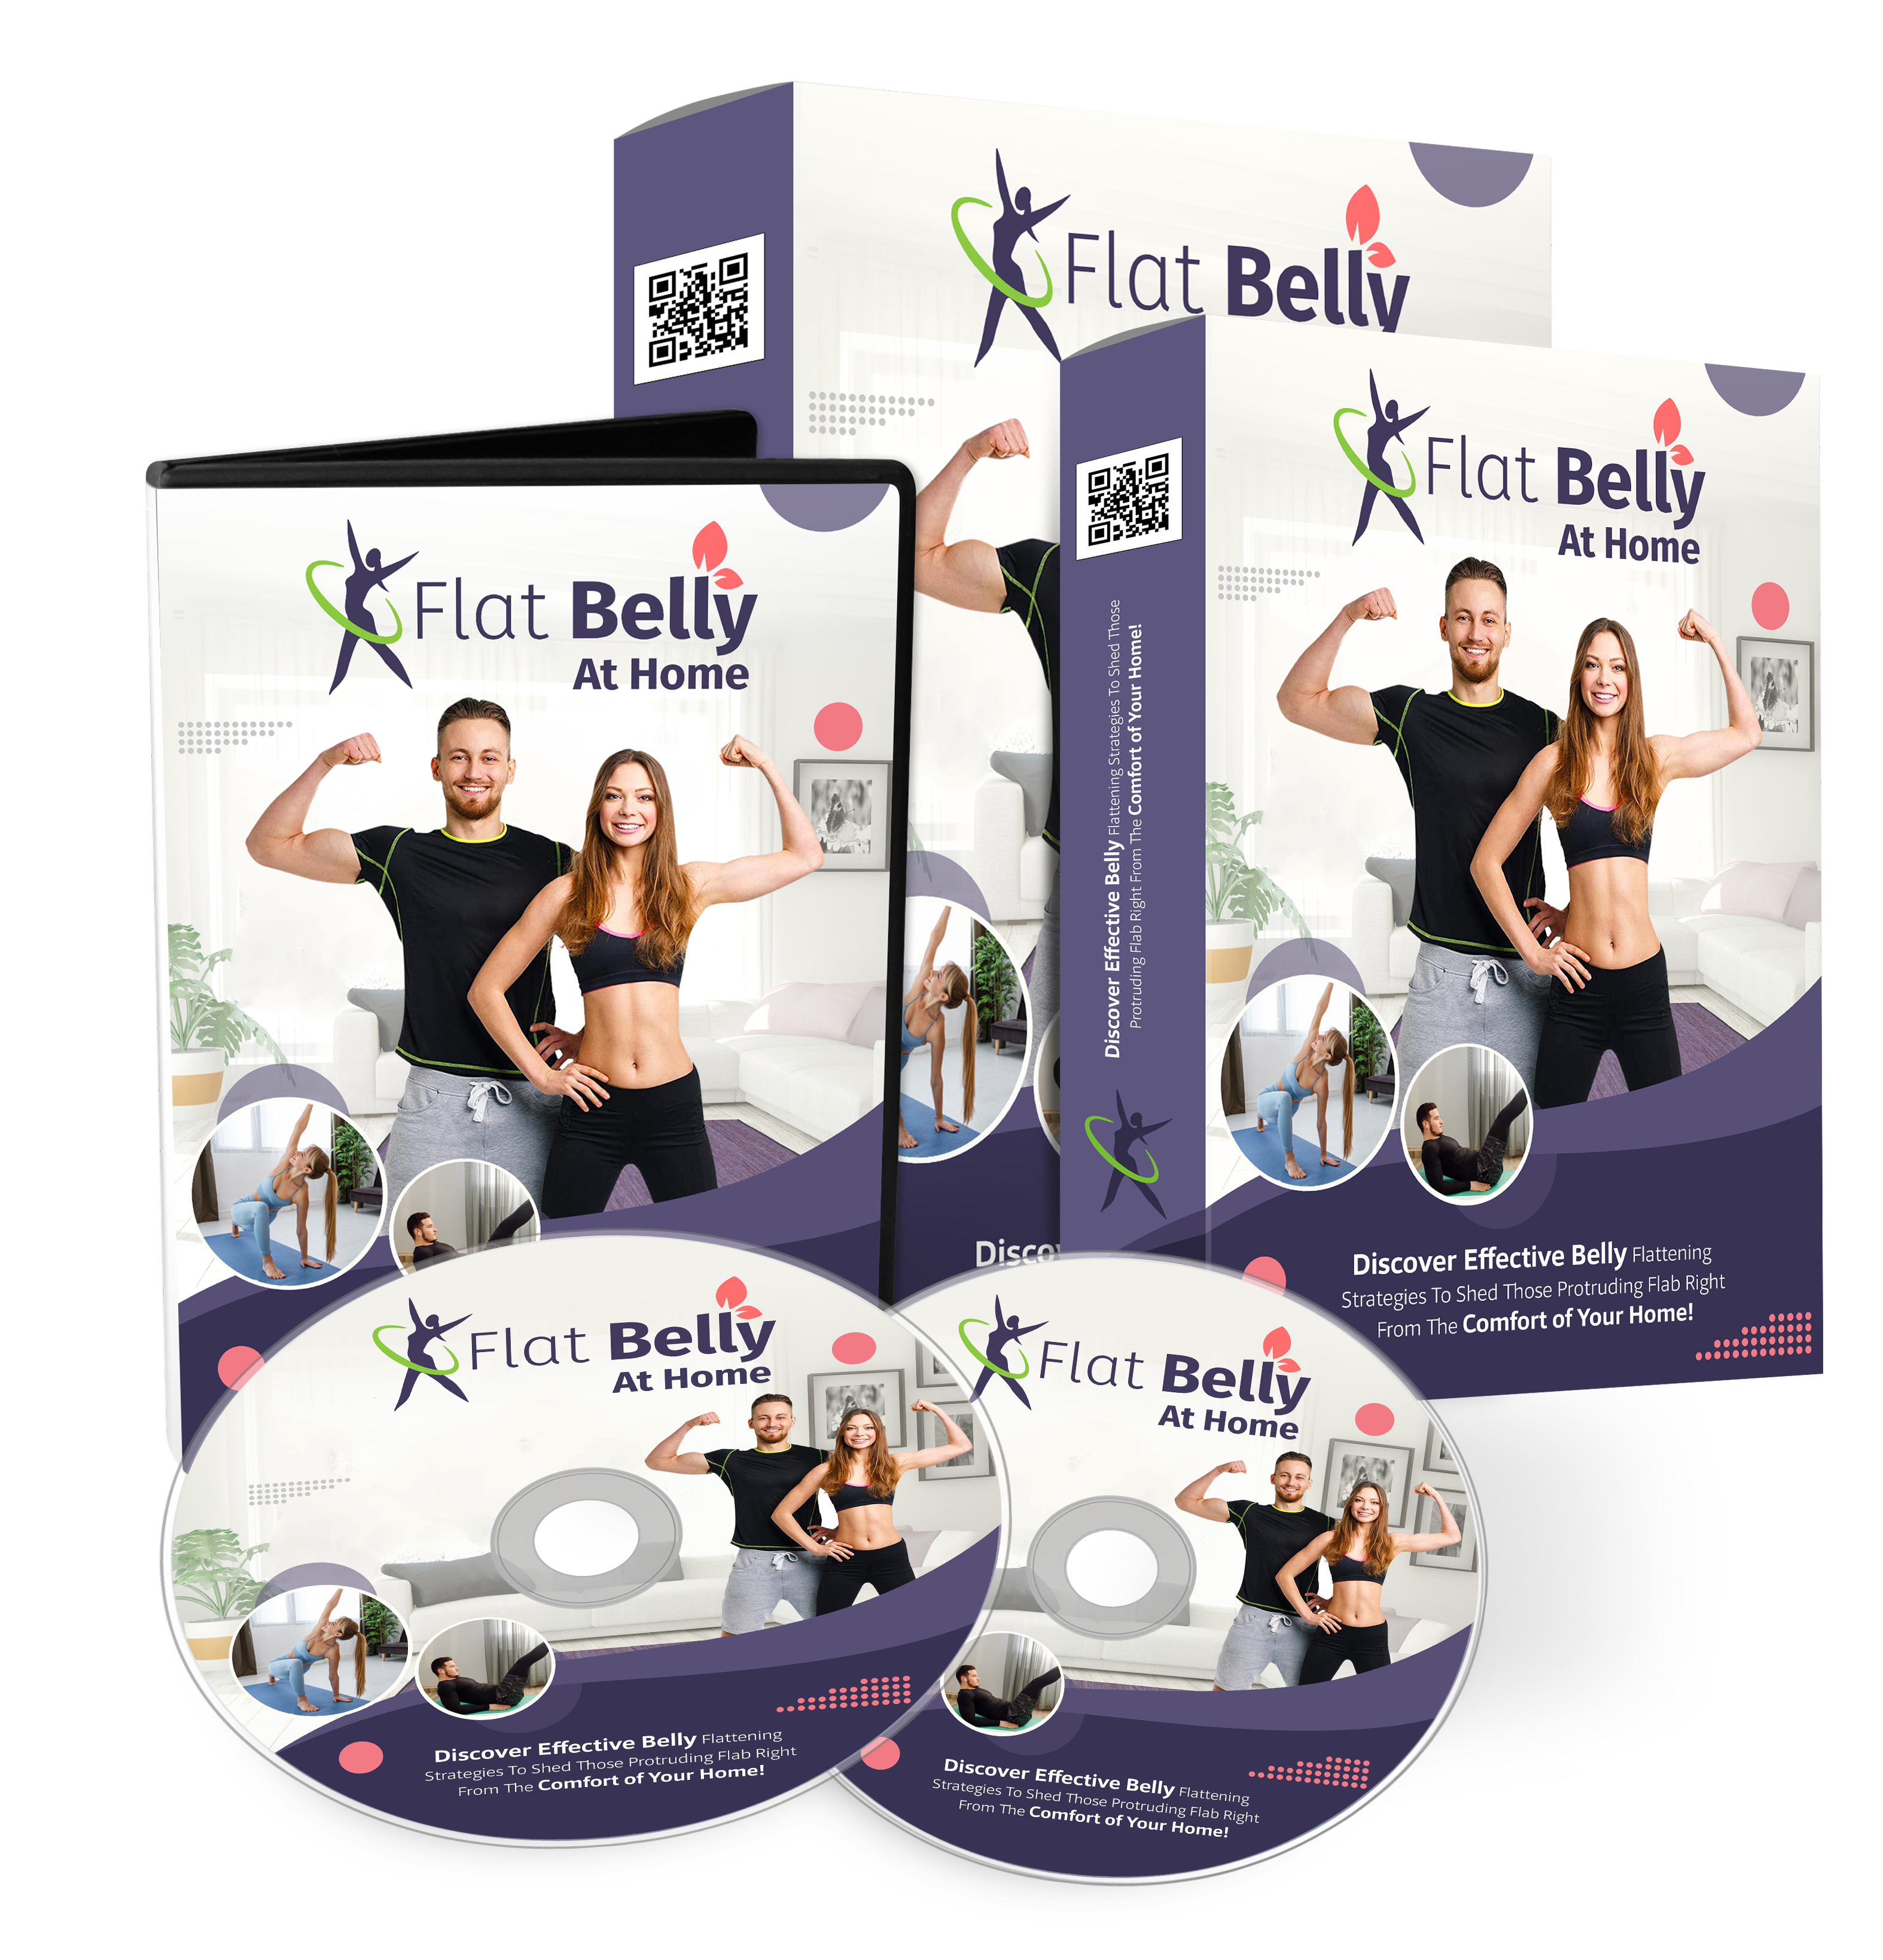 Weight Loss & Flat Belly Course